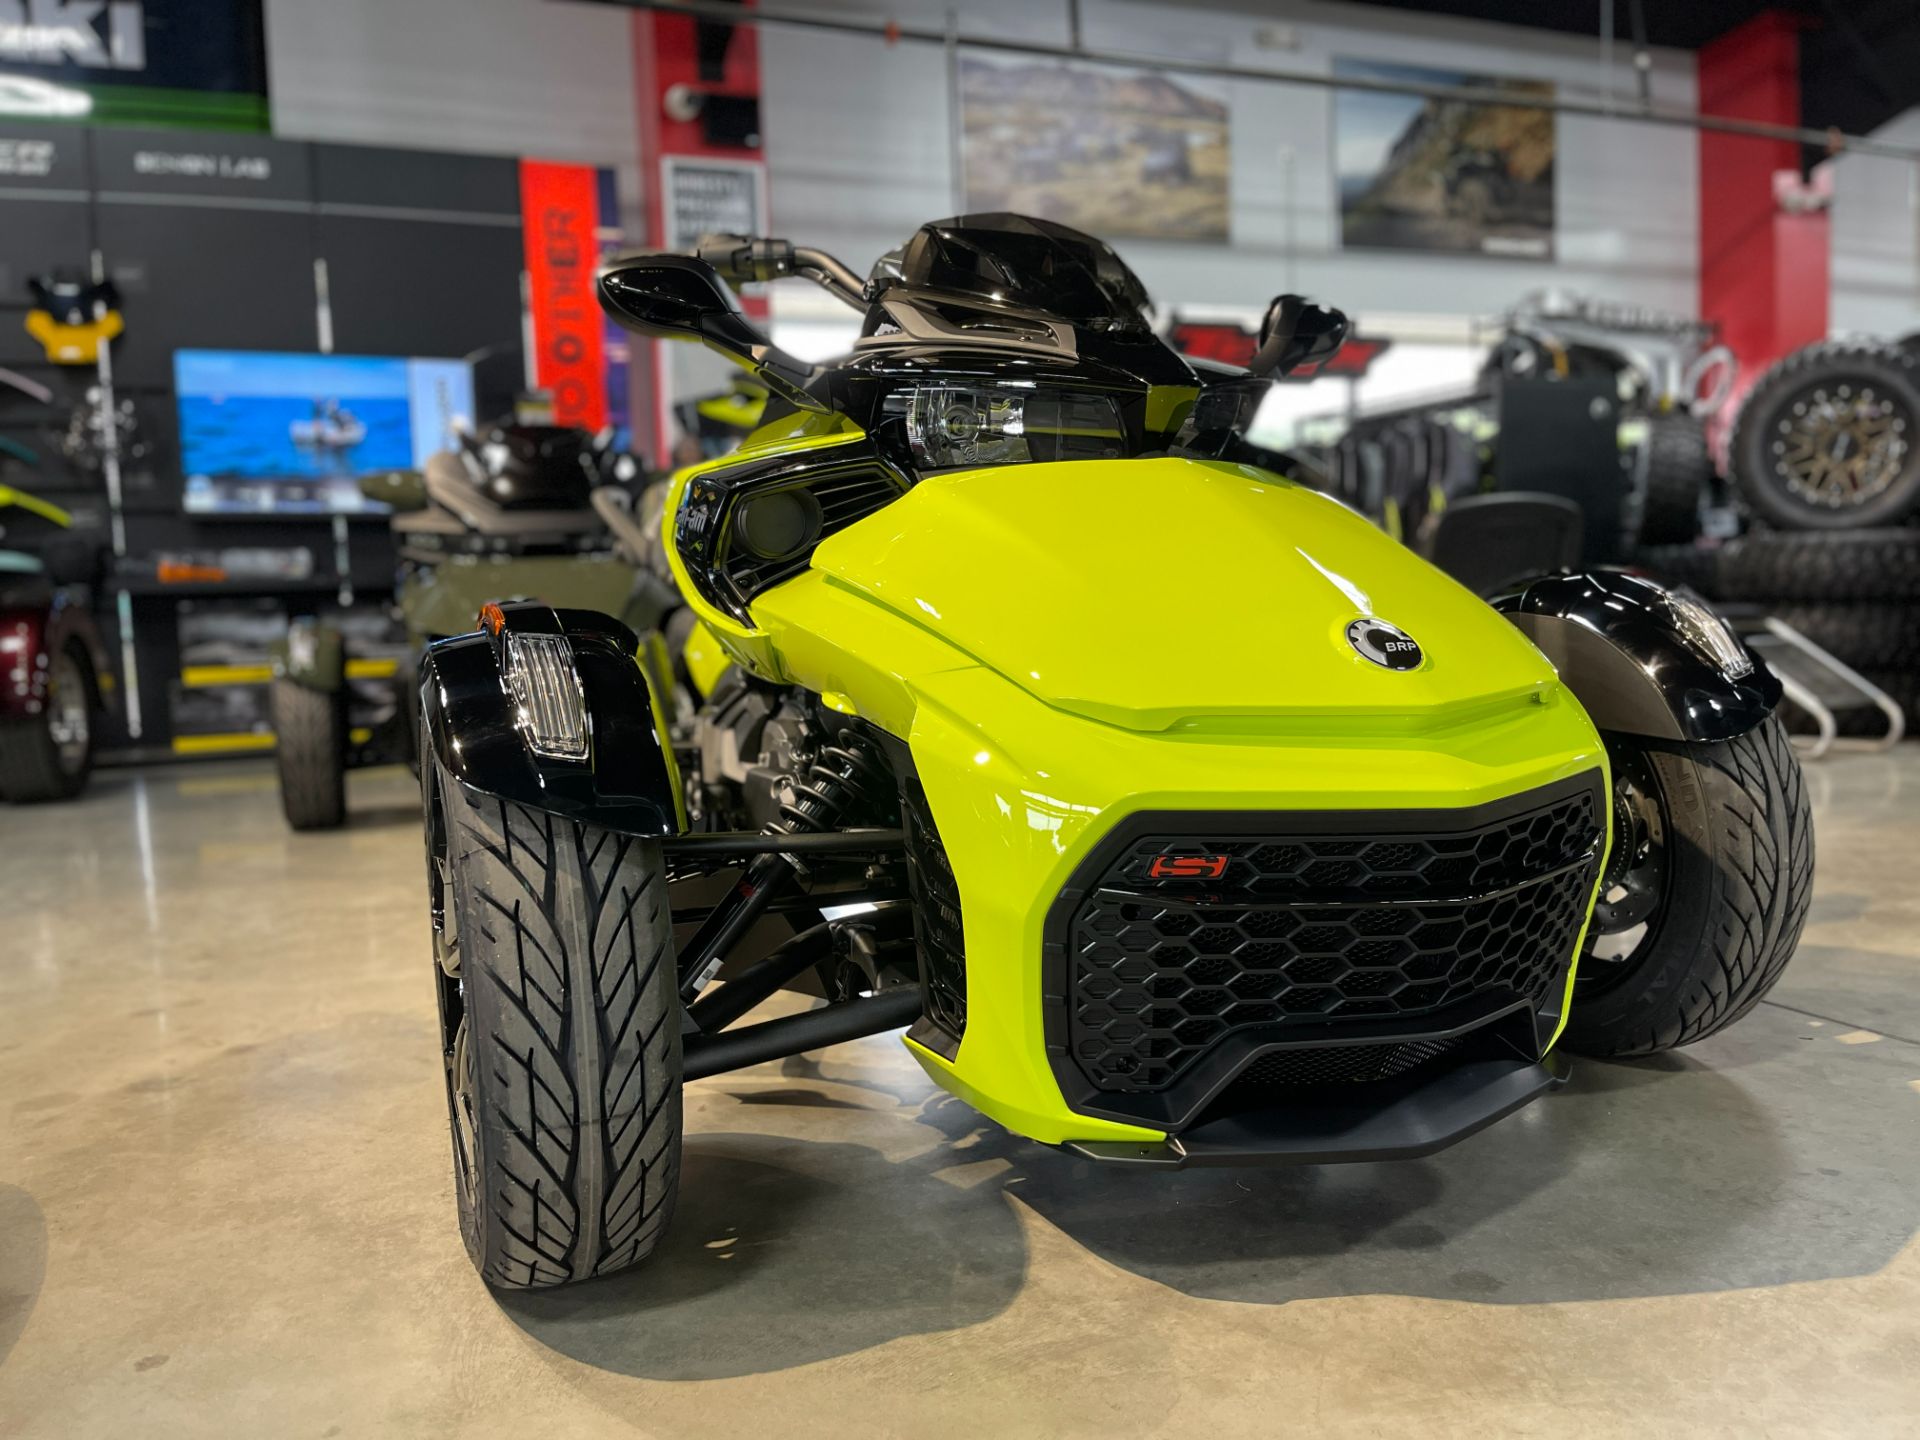 2023 Can-Am Spyder F3-S Special Series in Bessemer, Alabama - Photo 5